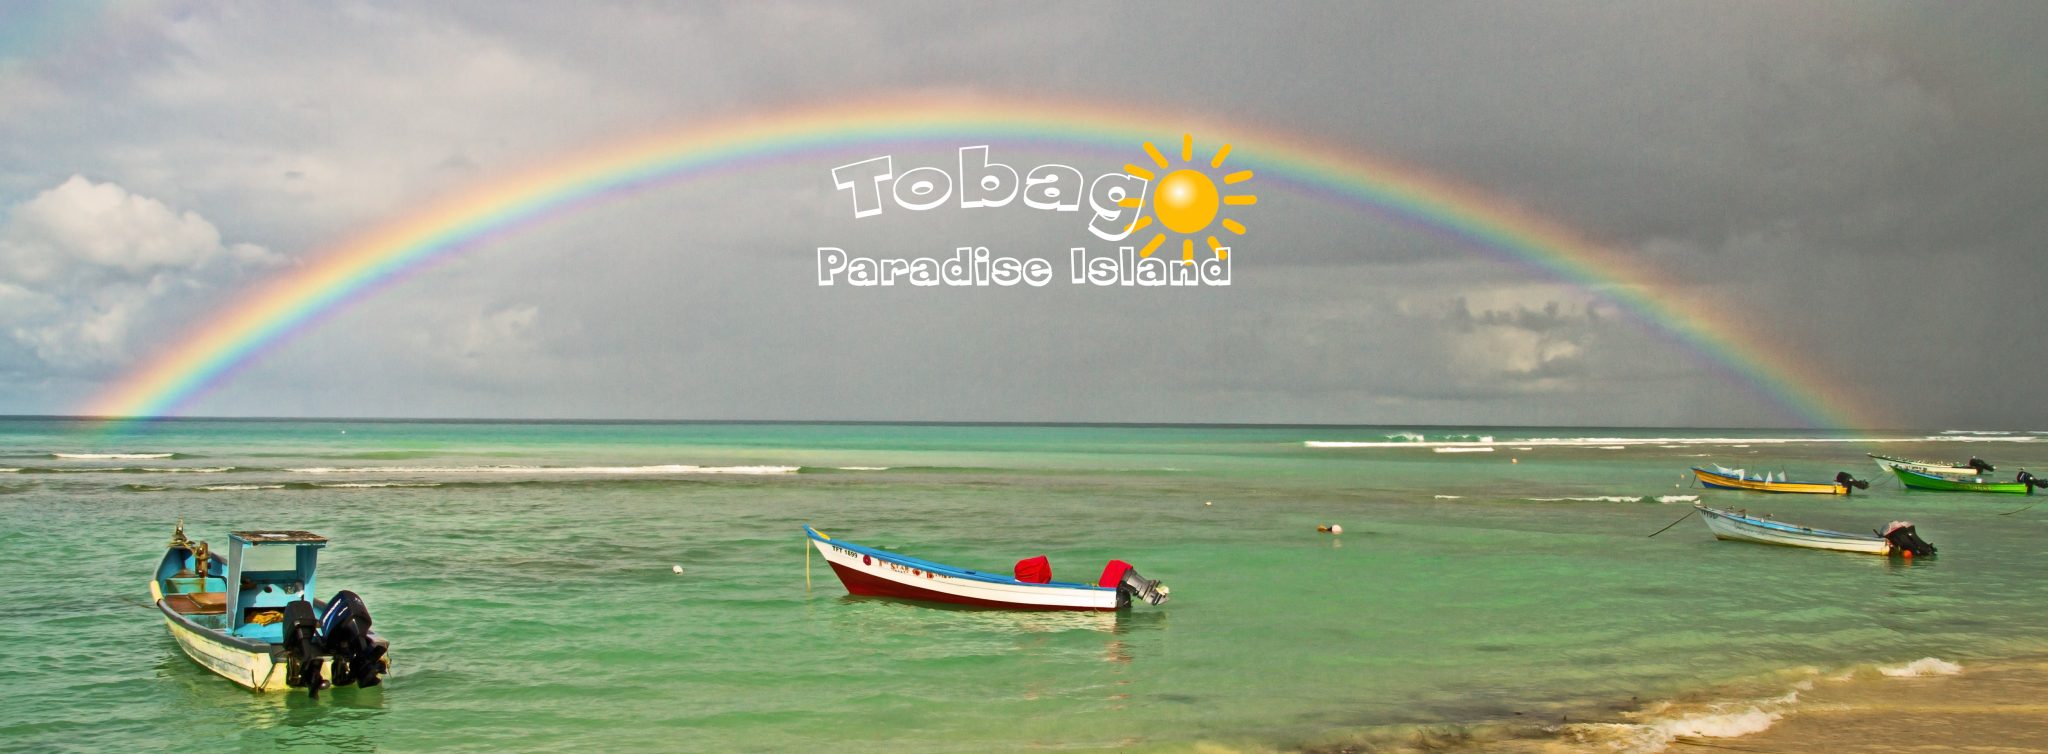 Our luck – our ticket to Tobago, T&T